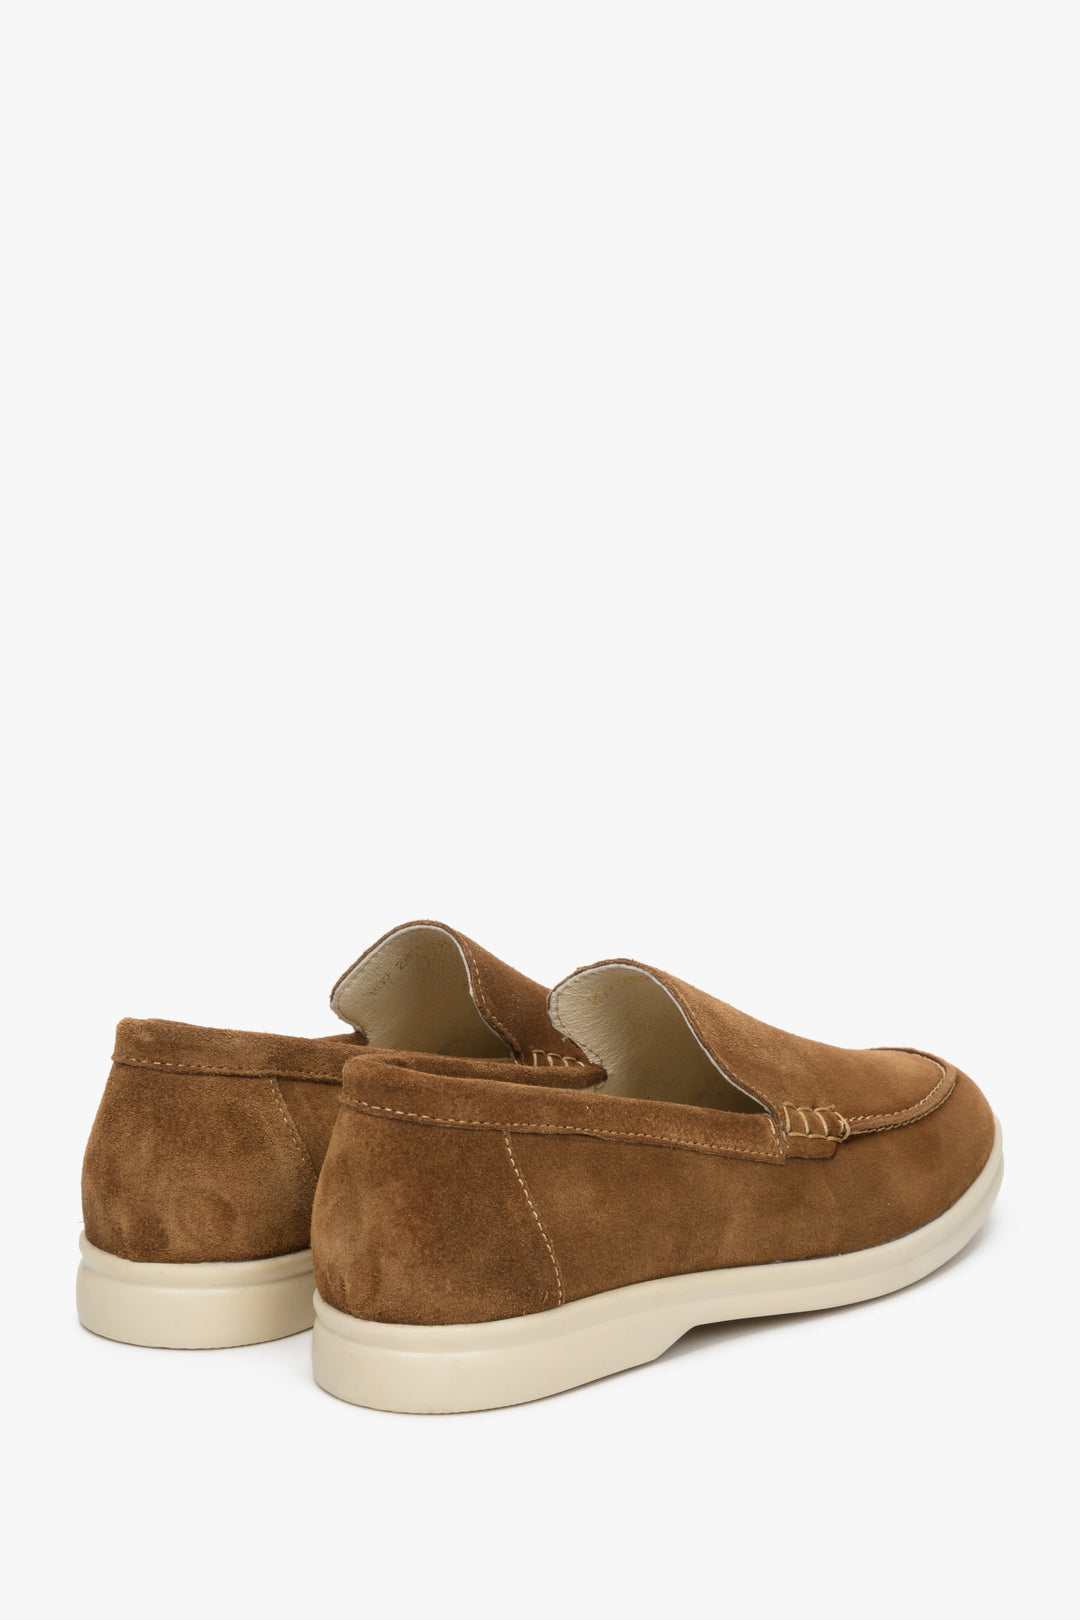 Women's suede loafers in brown Estro - close-up of the heel and side seam of the shoes.